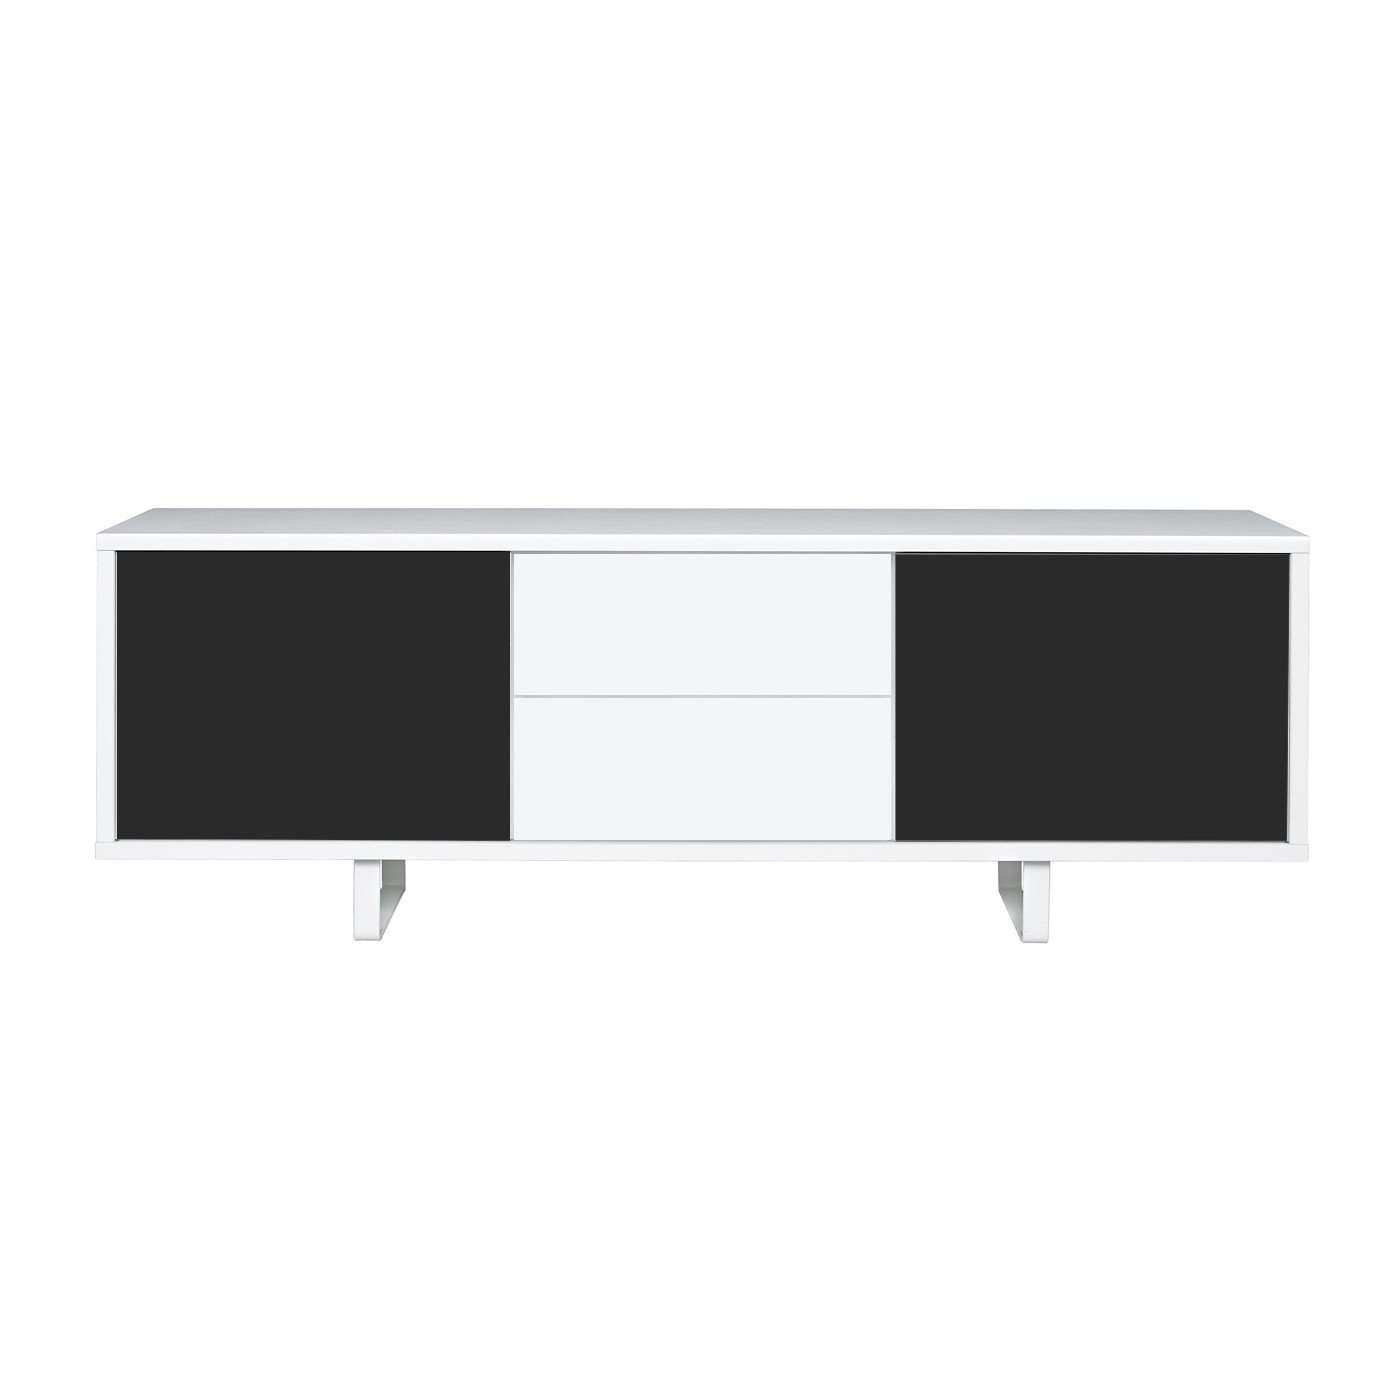 Tema Home-Slide High Sideboard With White Drawers 106058-SLIDEHIGHDR-Sideboard-MODTEMPO